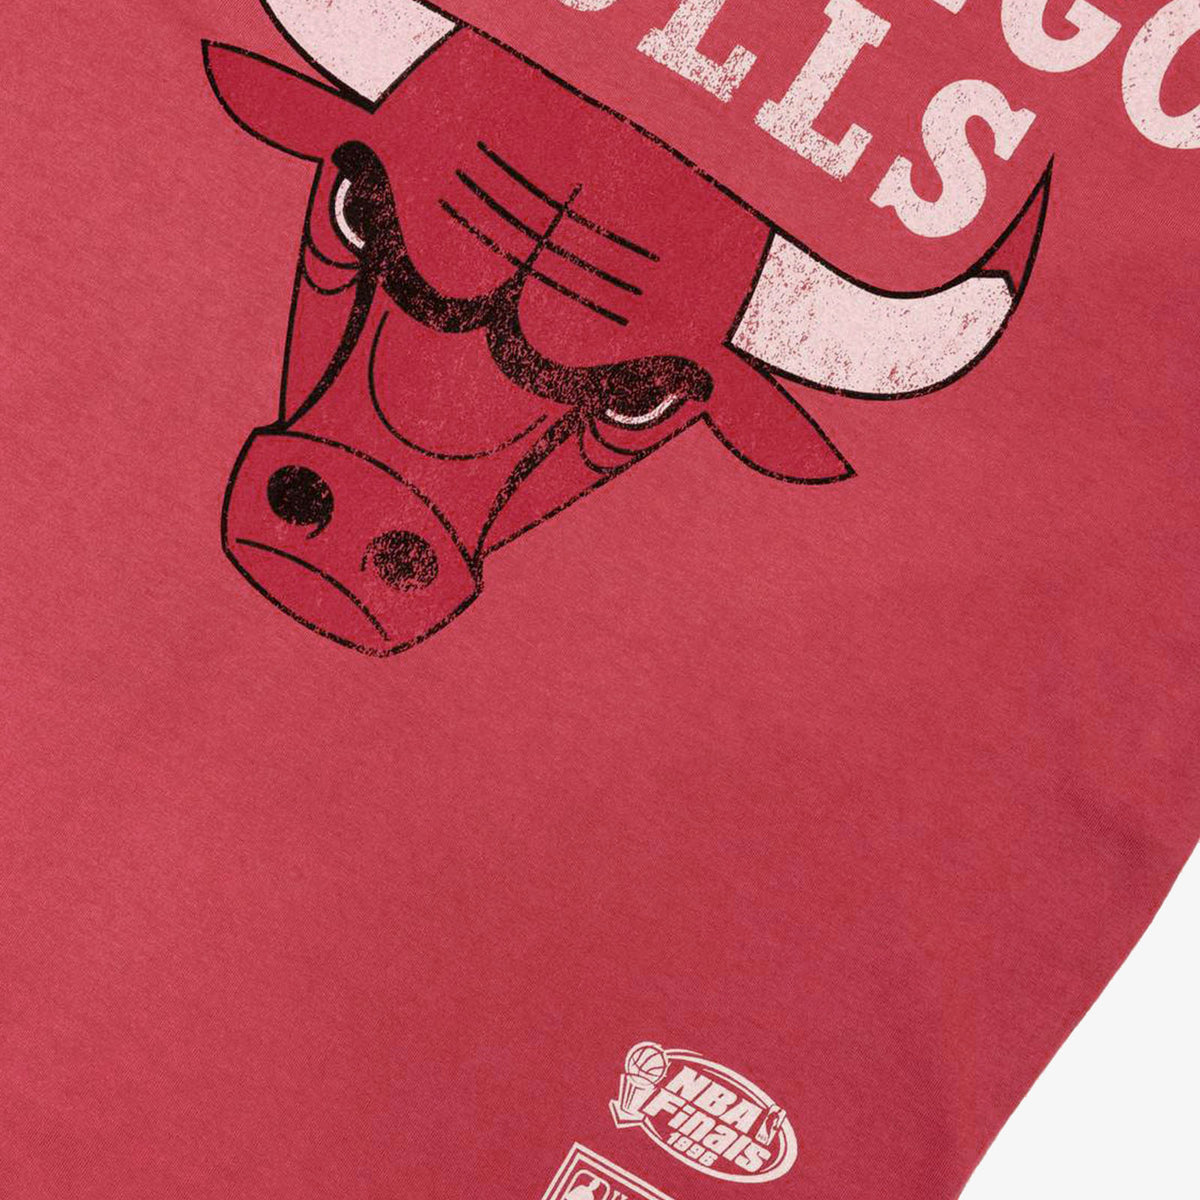 Chicago Bulls Washed Team Logo Red T-Shirt